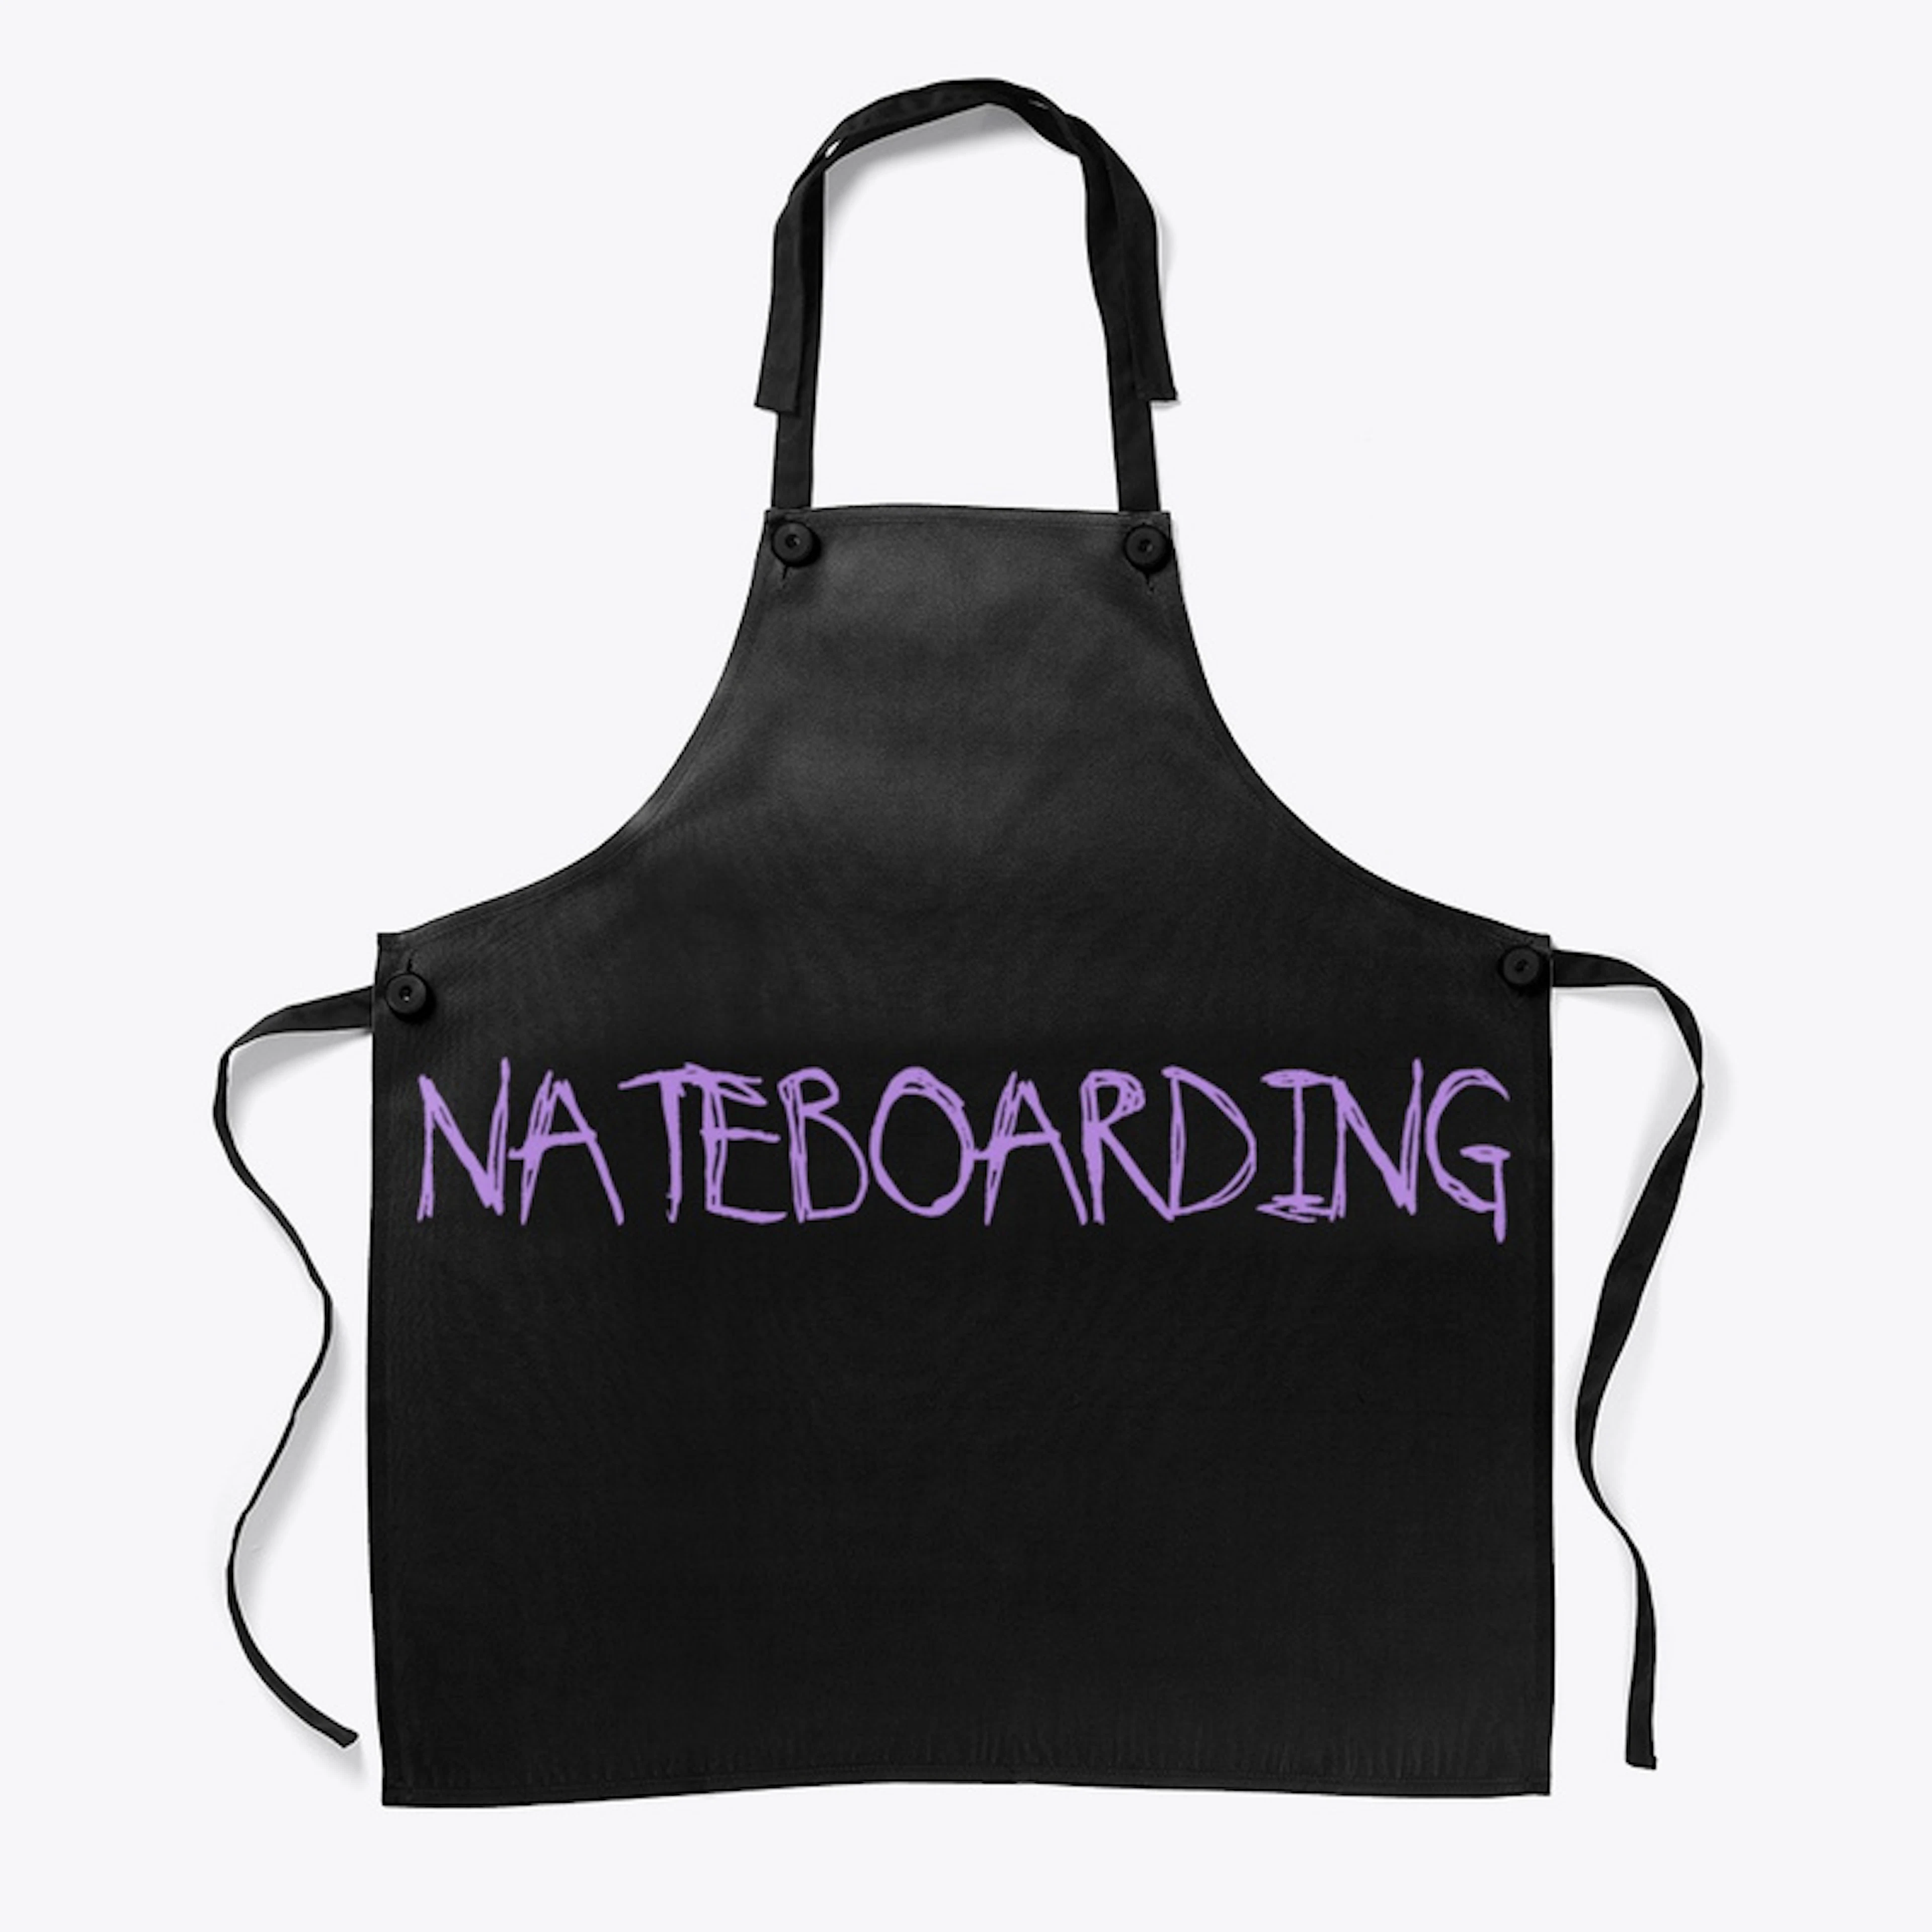 Nateboarding "Love Your Friends"